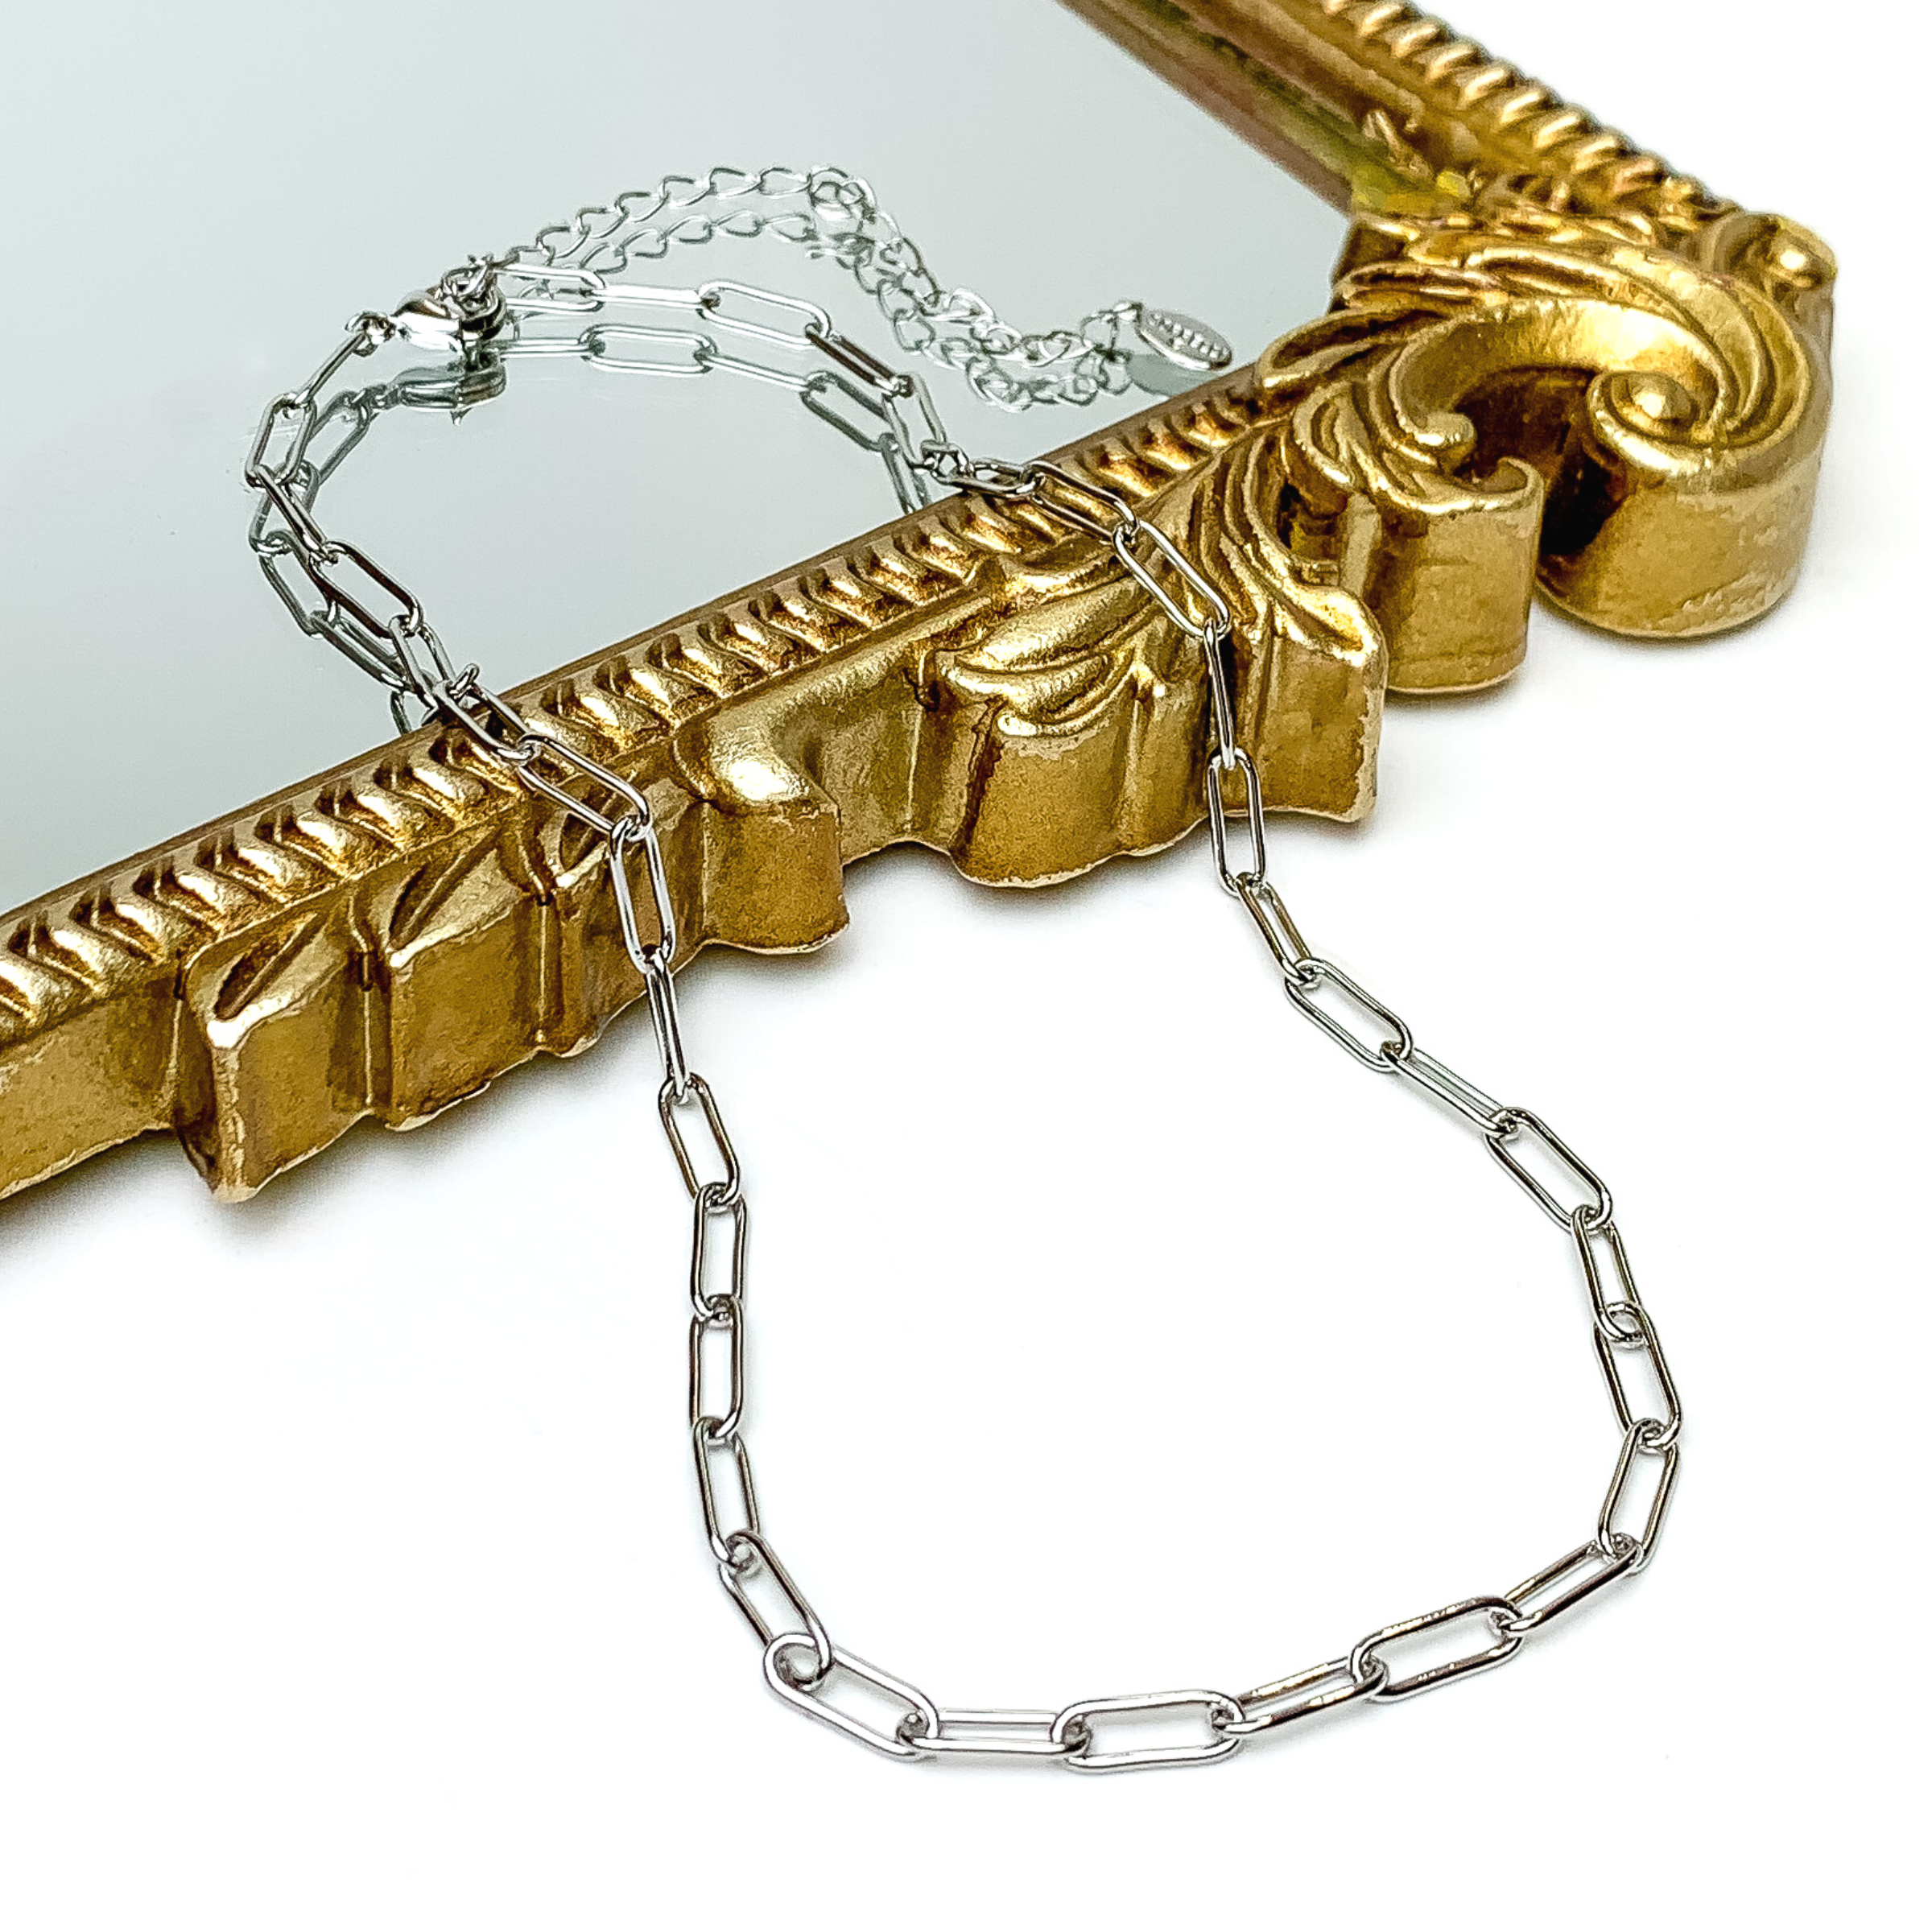 Silver, paperclip chain necklace pictured laying partially on a gold mirror on a white background. 